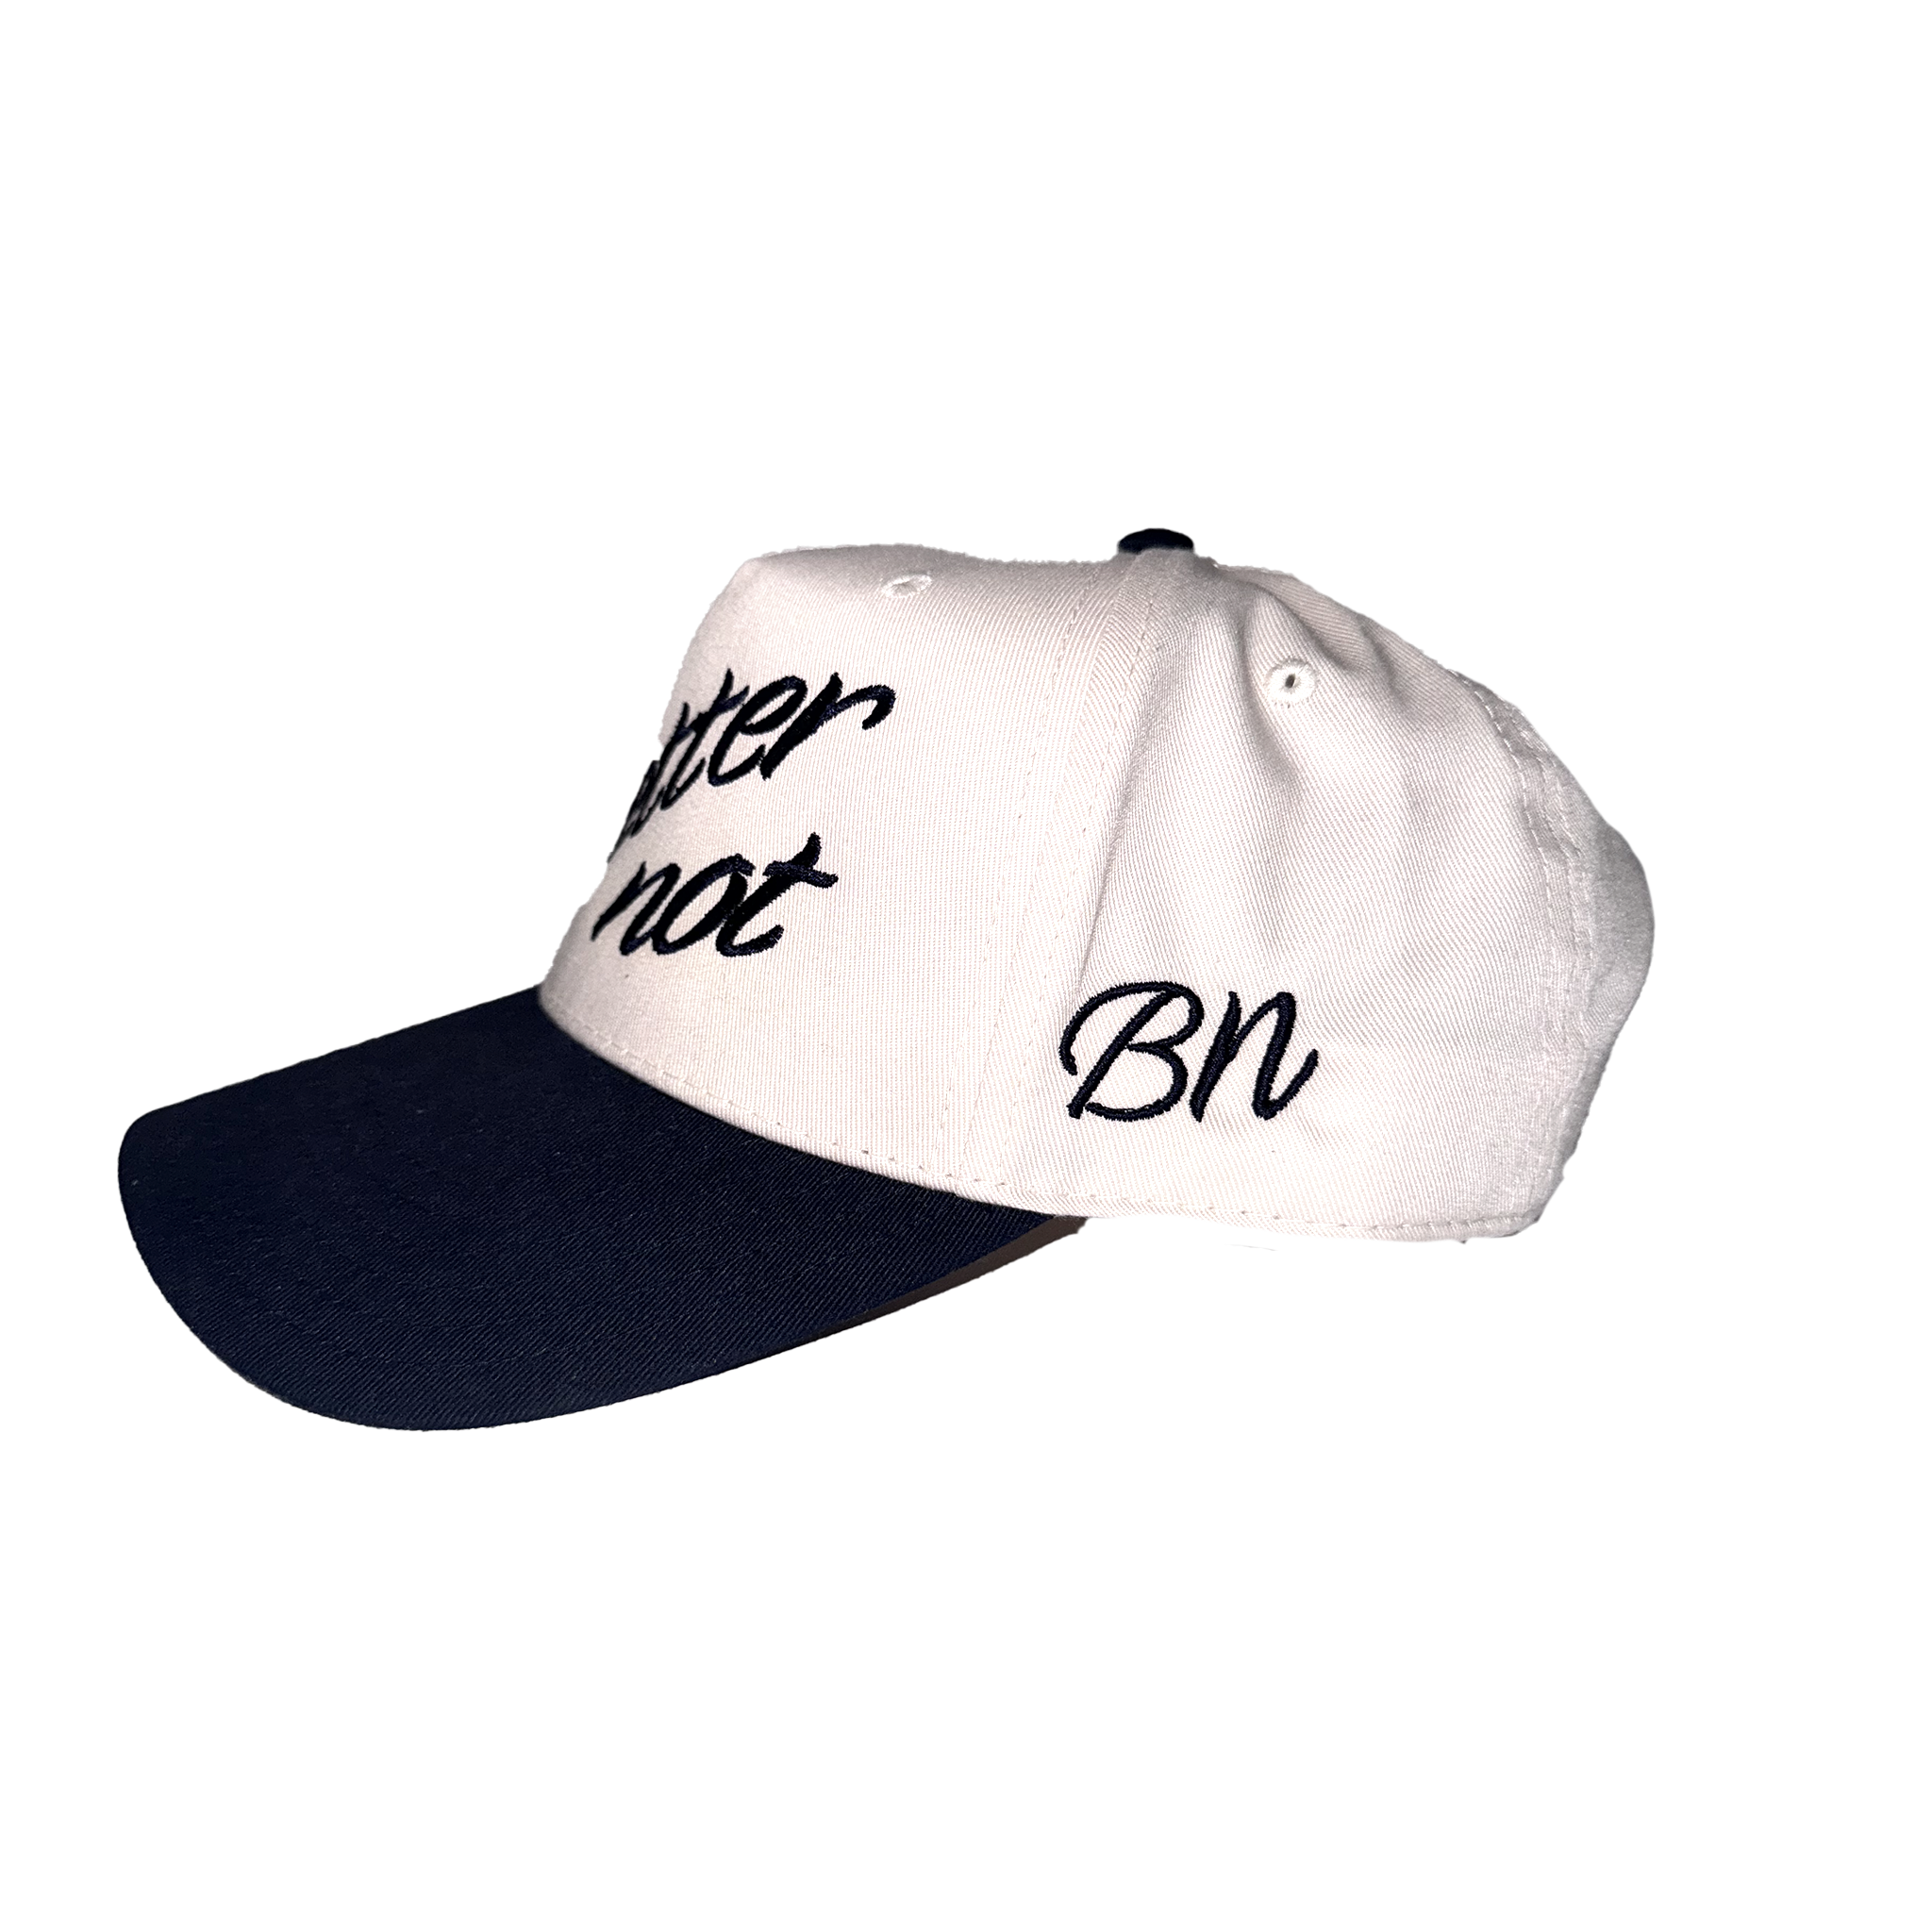 A white and navy 5-panel hat with the phrases "better not" and "bn" embroidered in black script on the front of The Classic hat by Better Not.